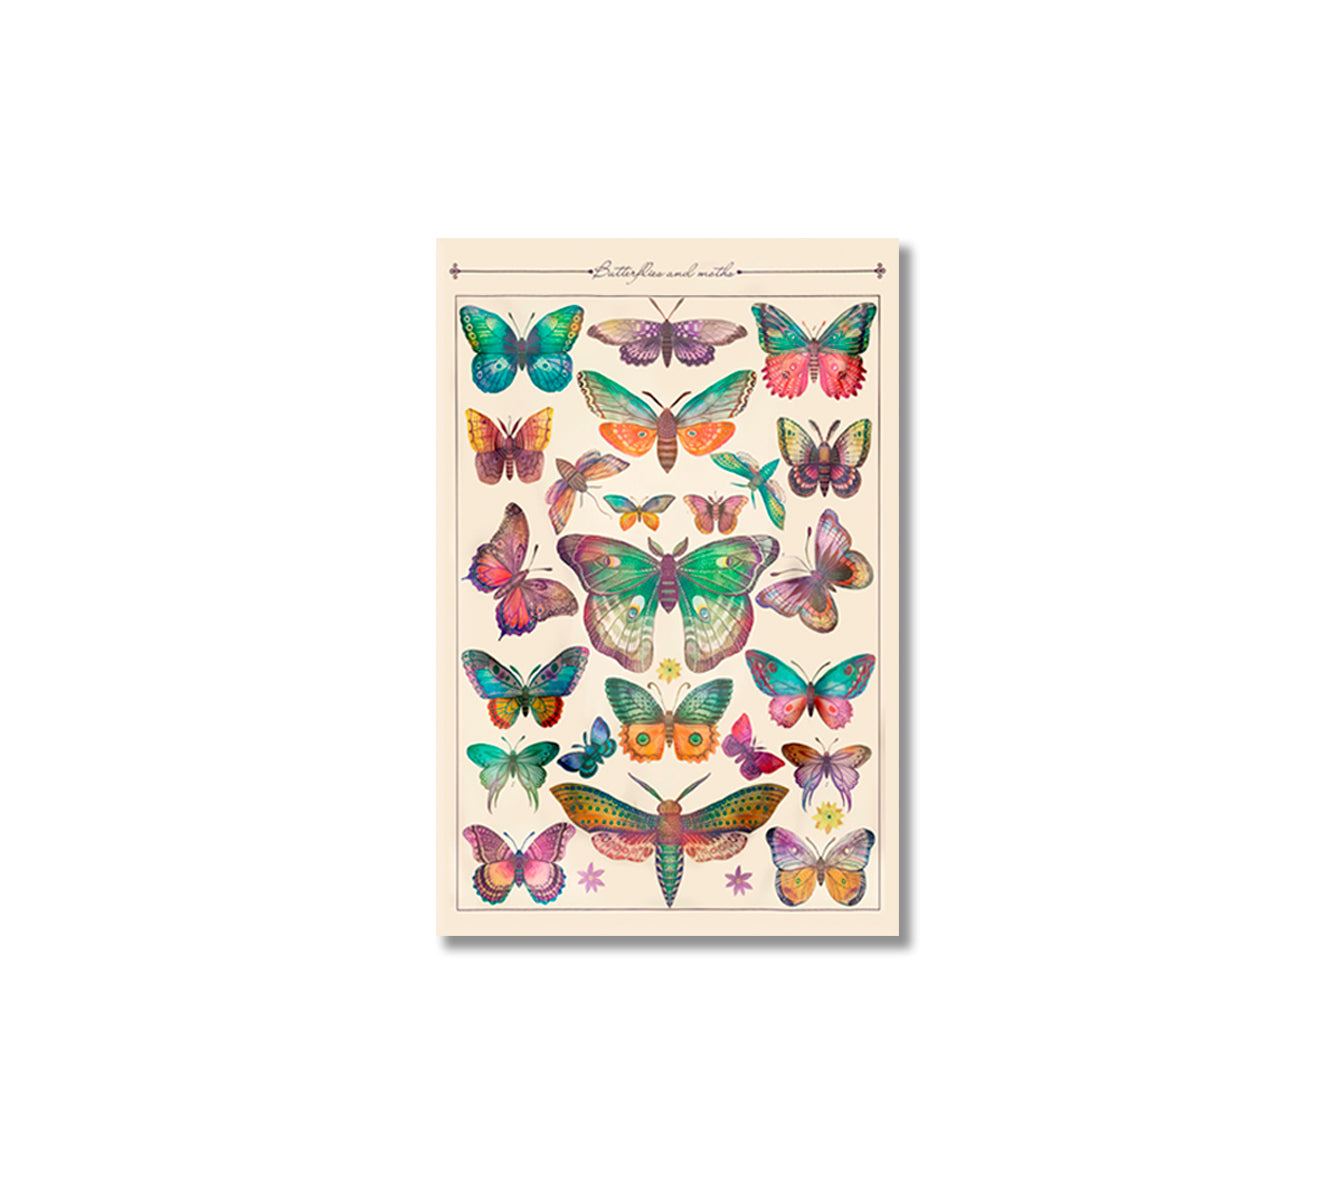 Vintage Butterfly Canvas Home Wall Art-Canvas Print-CetArt-1 panel-16x24 inches-CetArt